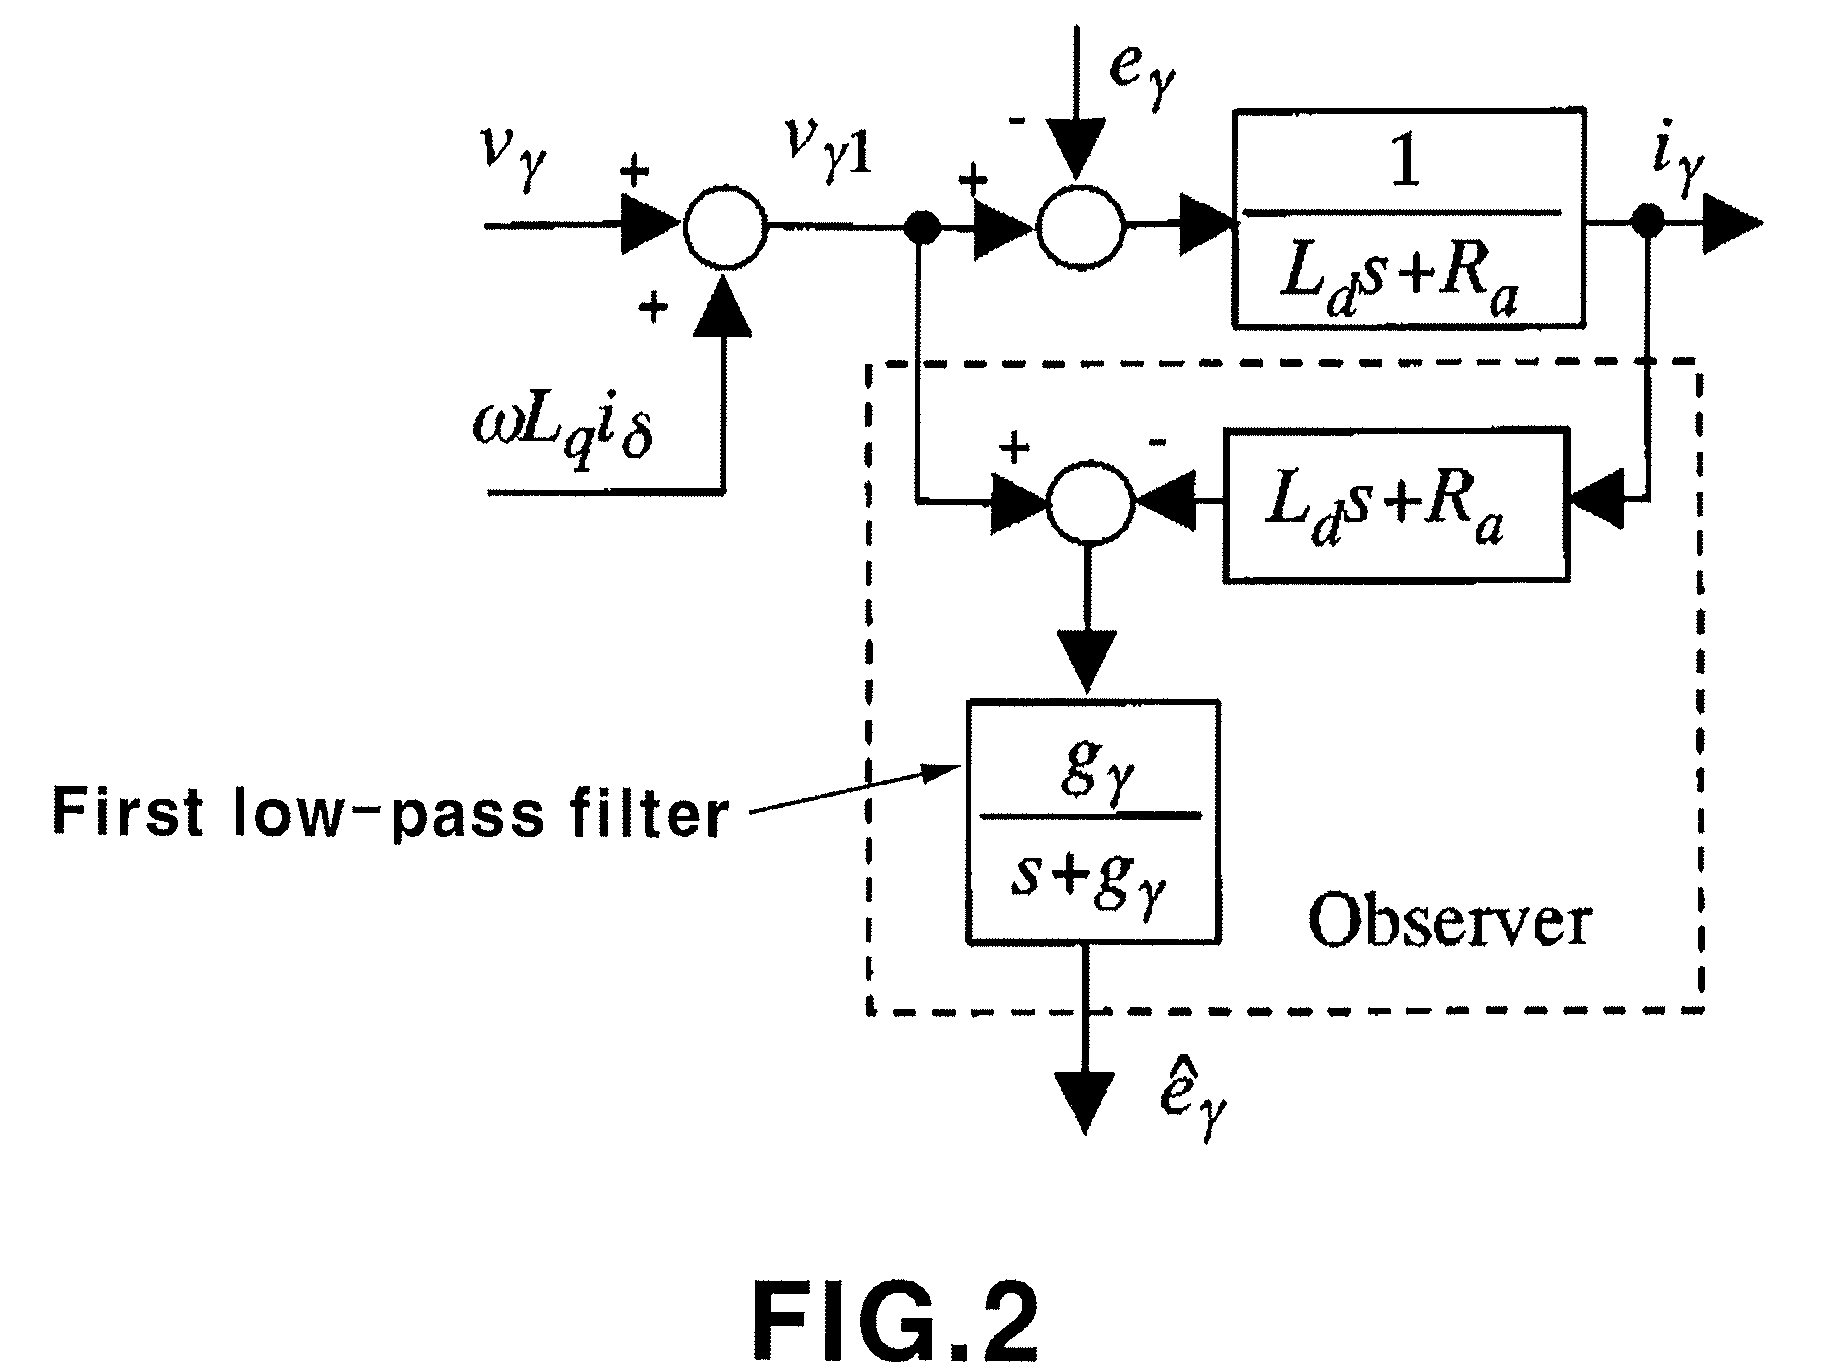 Sensorless control method of high performance permanent magnet synchronous motor during emergency operation